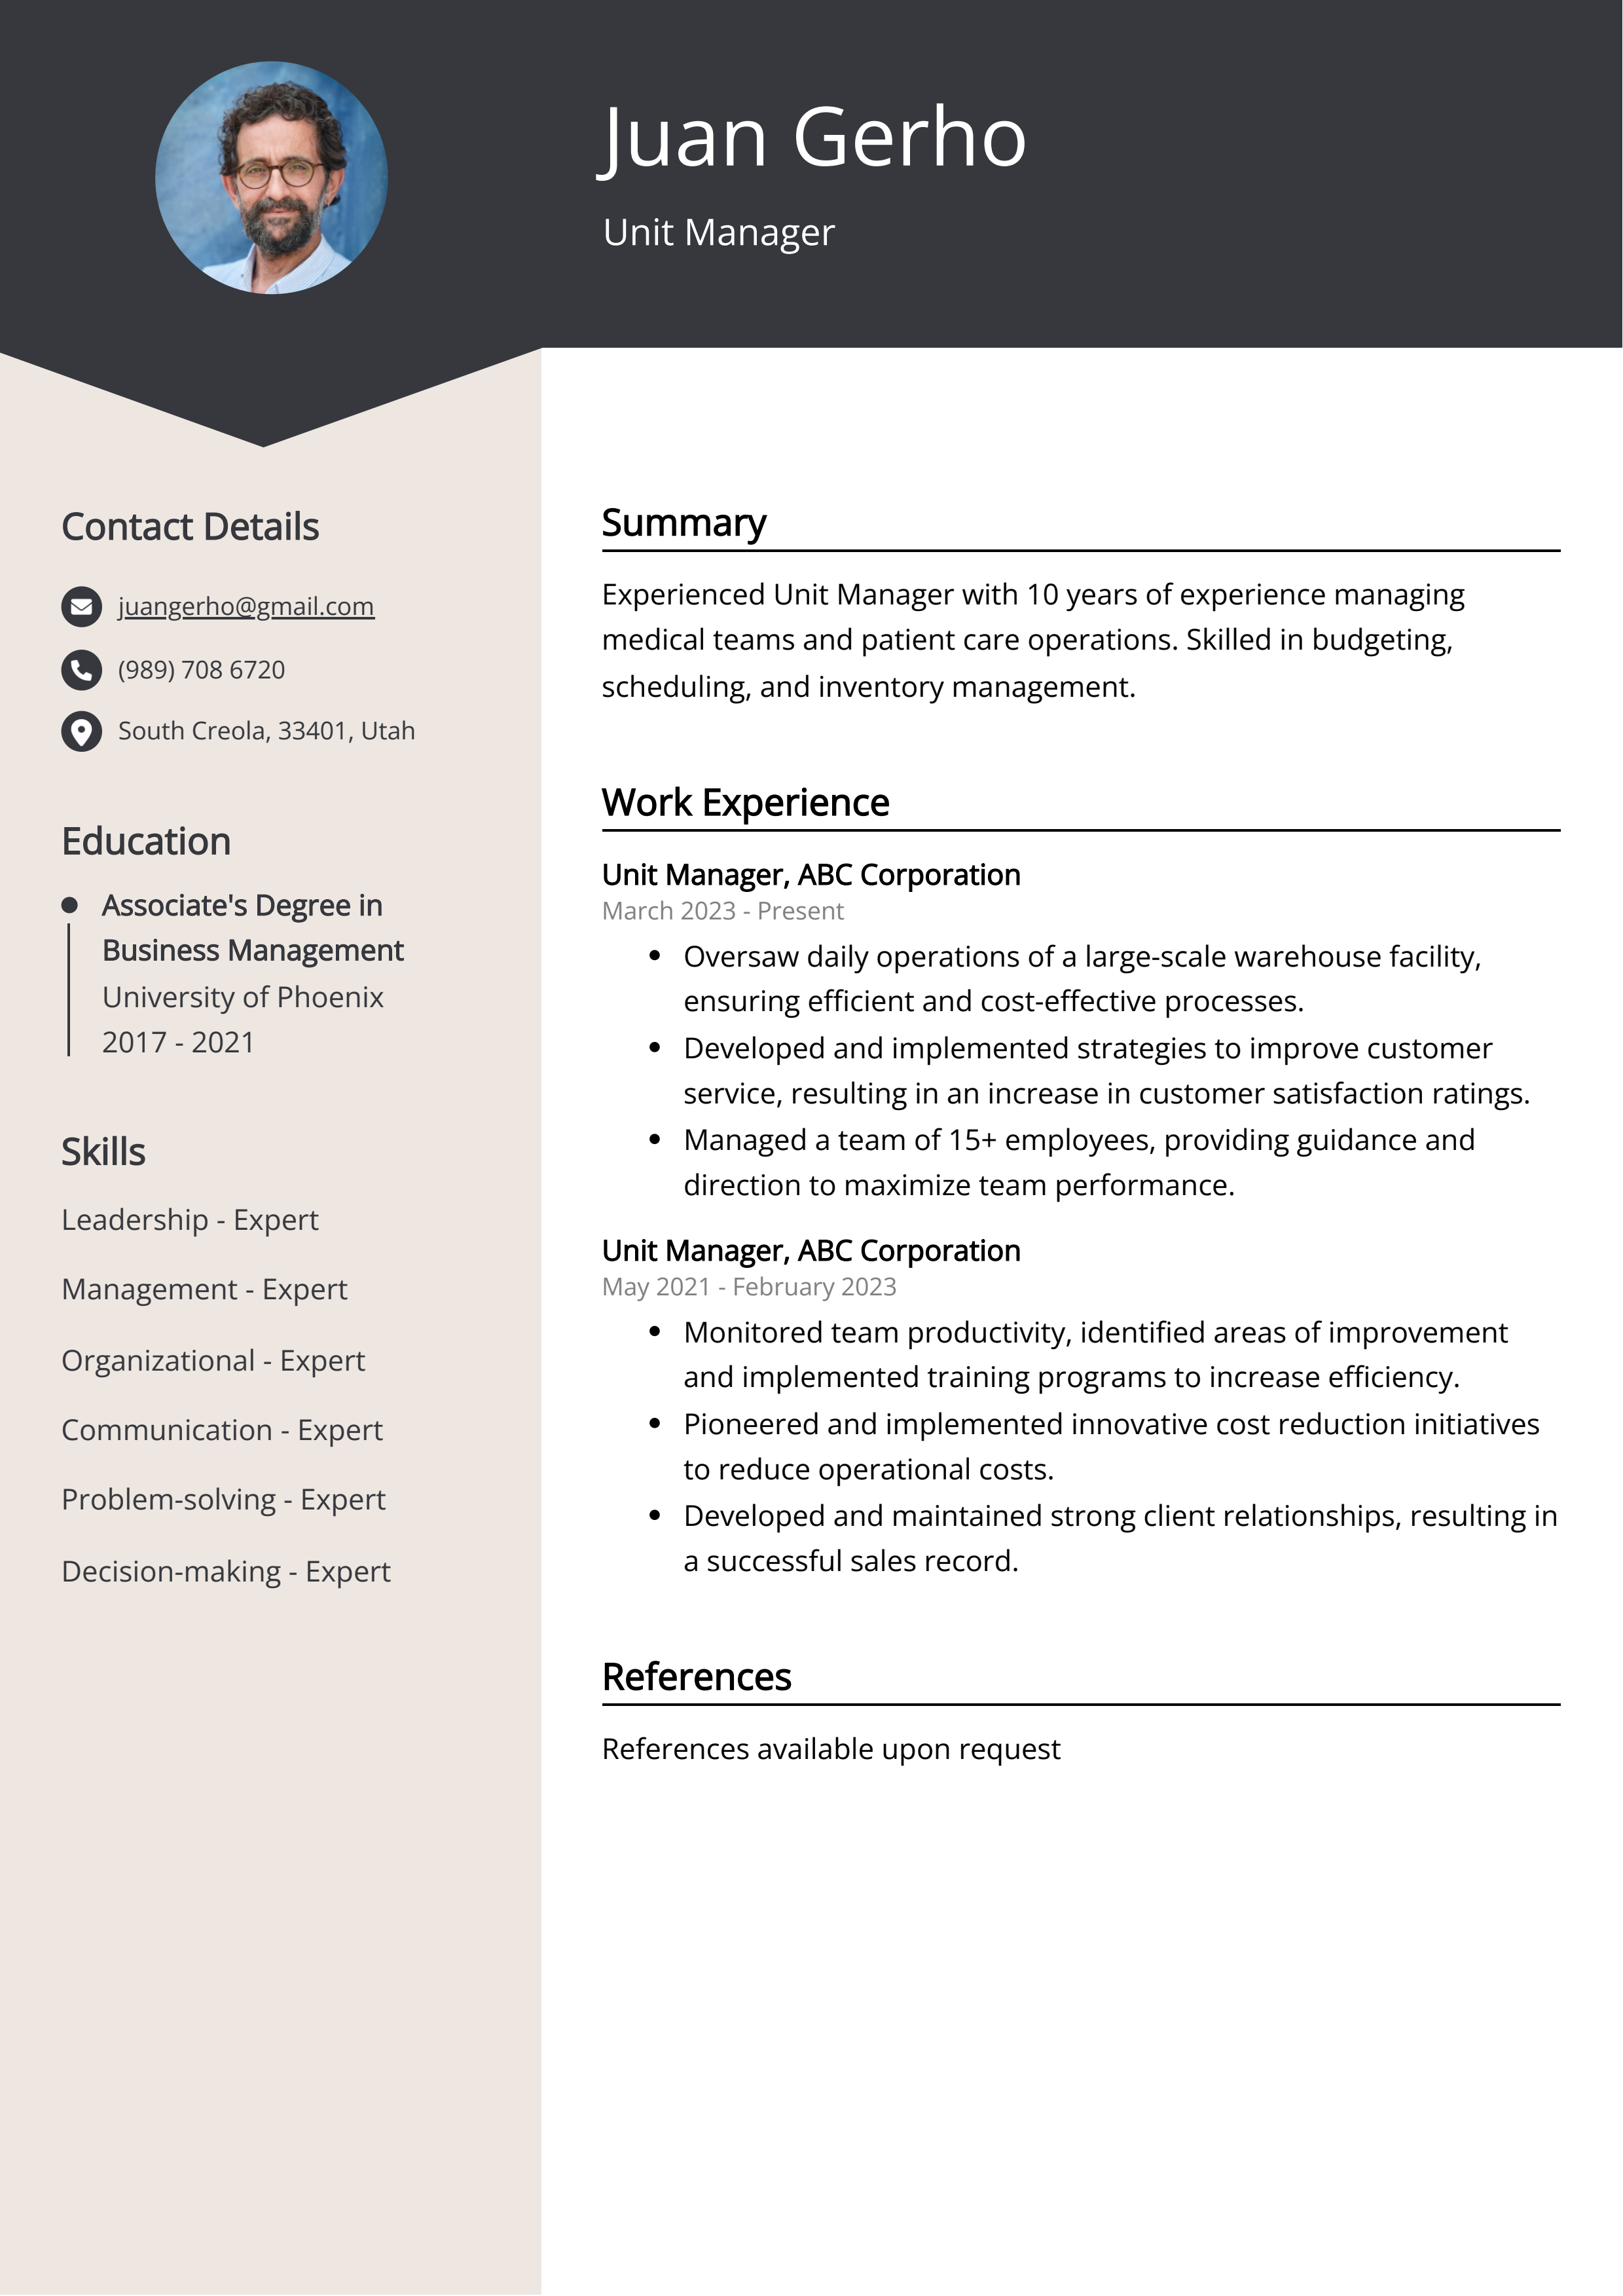 Unit Manager CV Example